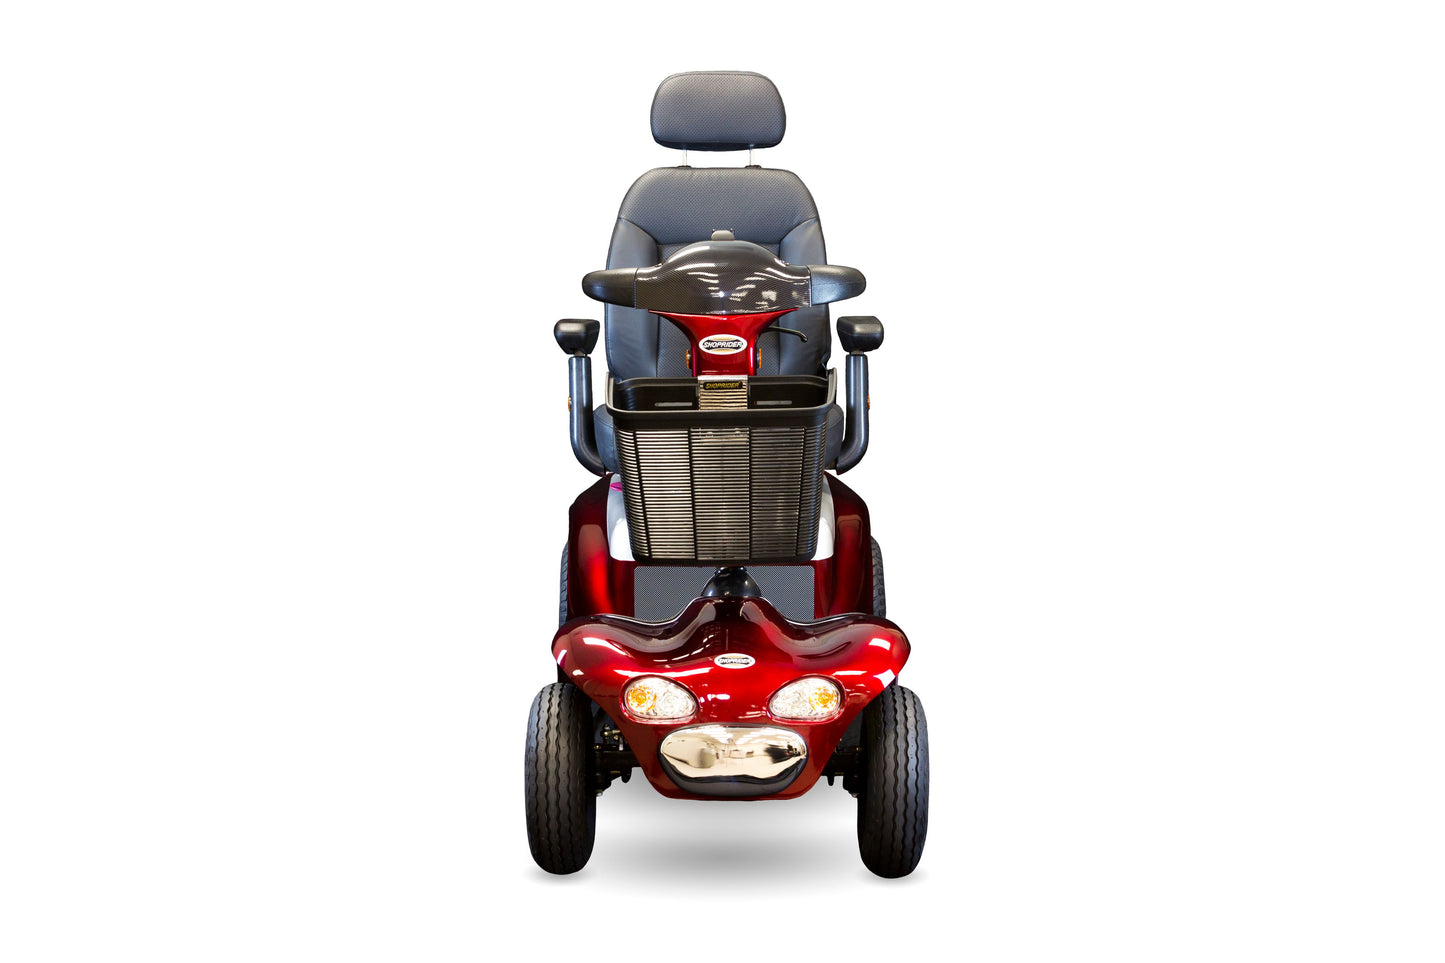 Shoprider Enduro XL4 4-Wheel Extra Long Distance Mobility Scooter - Swivel Chair, Full Suspension For Max Comfort, 500lbs Weight Capacity, For Seniors